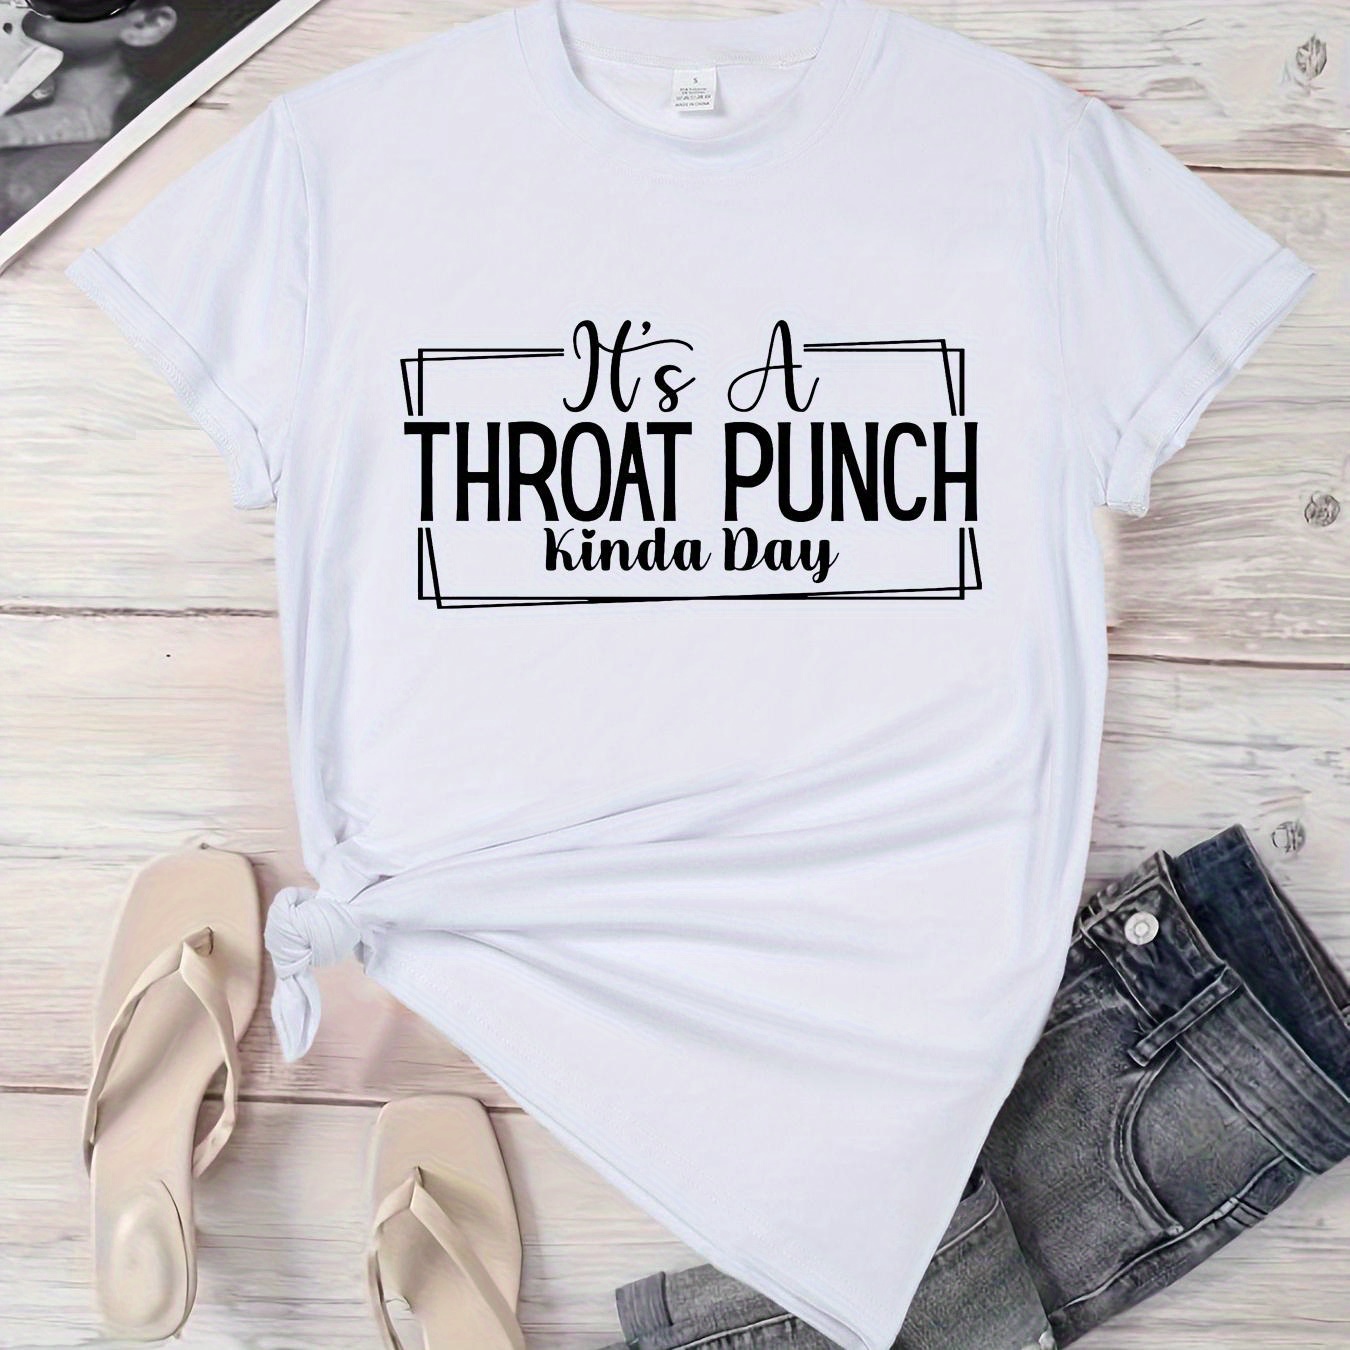 

Women's T-shirt With "it's A Throat Punch Kinda Day" Print, Casual Round Neck, Soft Fabric Short Sleeve Top